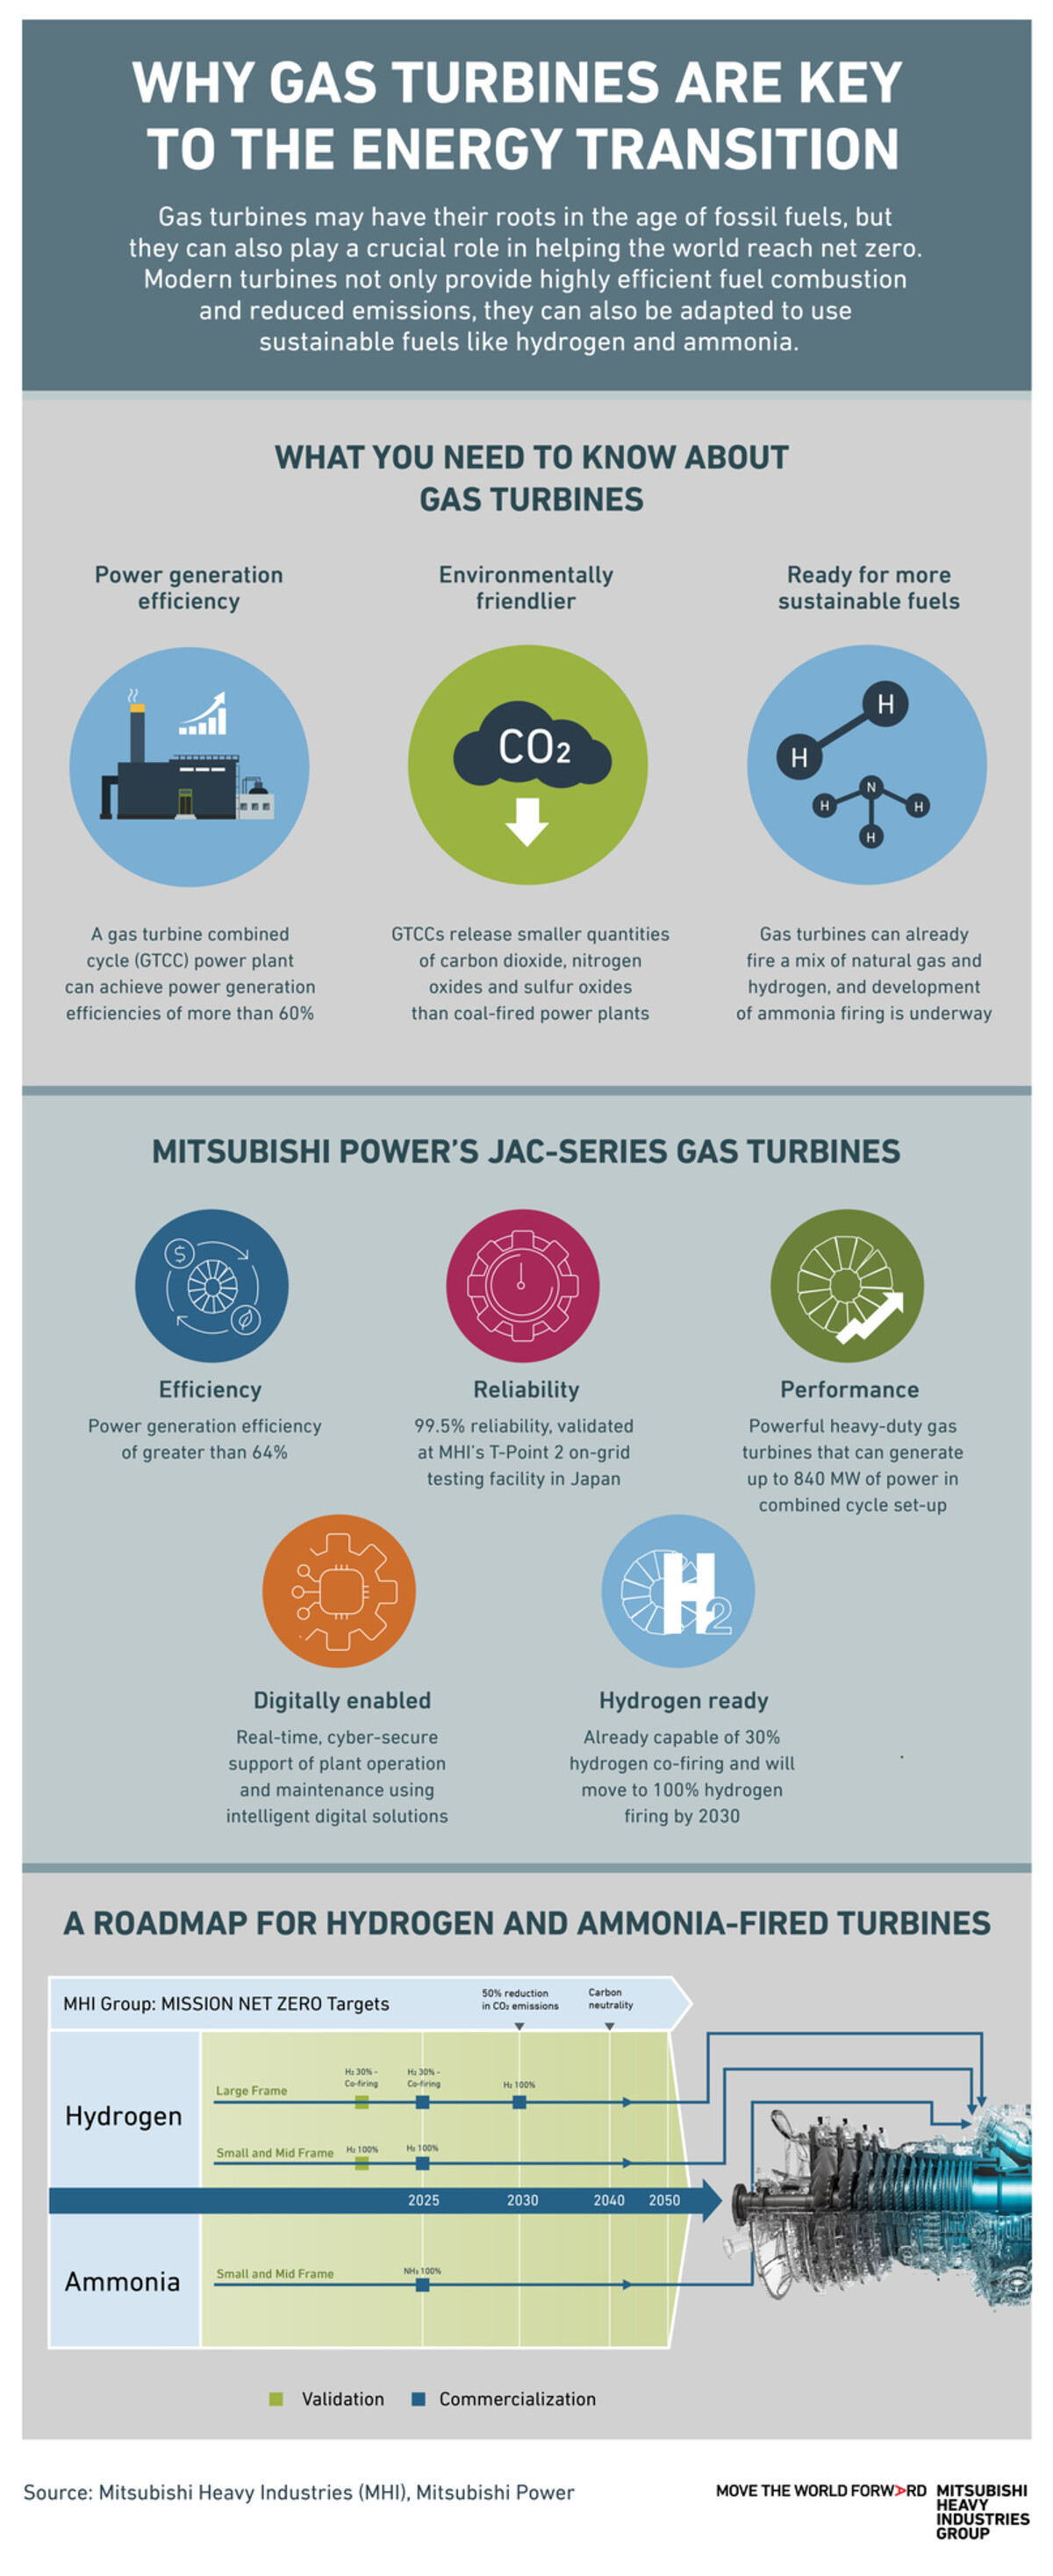 Gas turbines have a crucial role to play in helping the world reach net zero